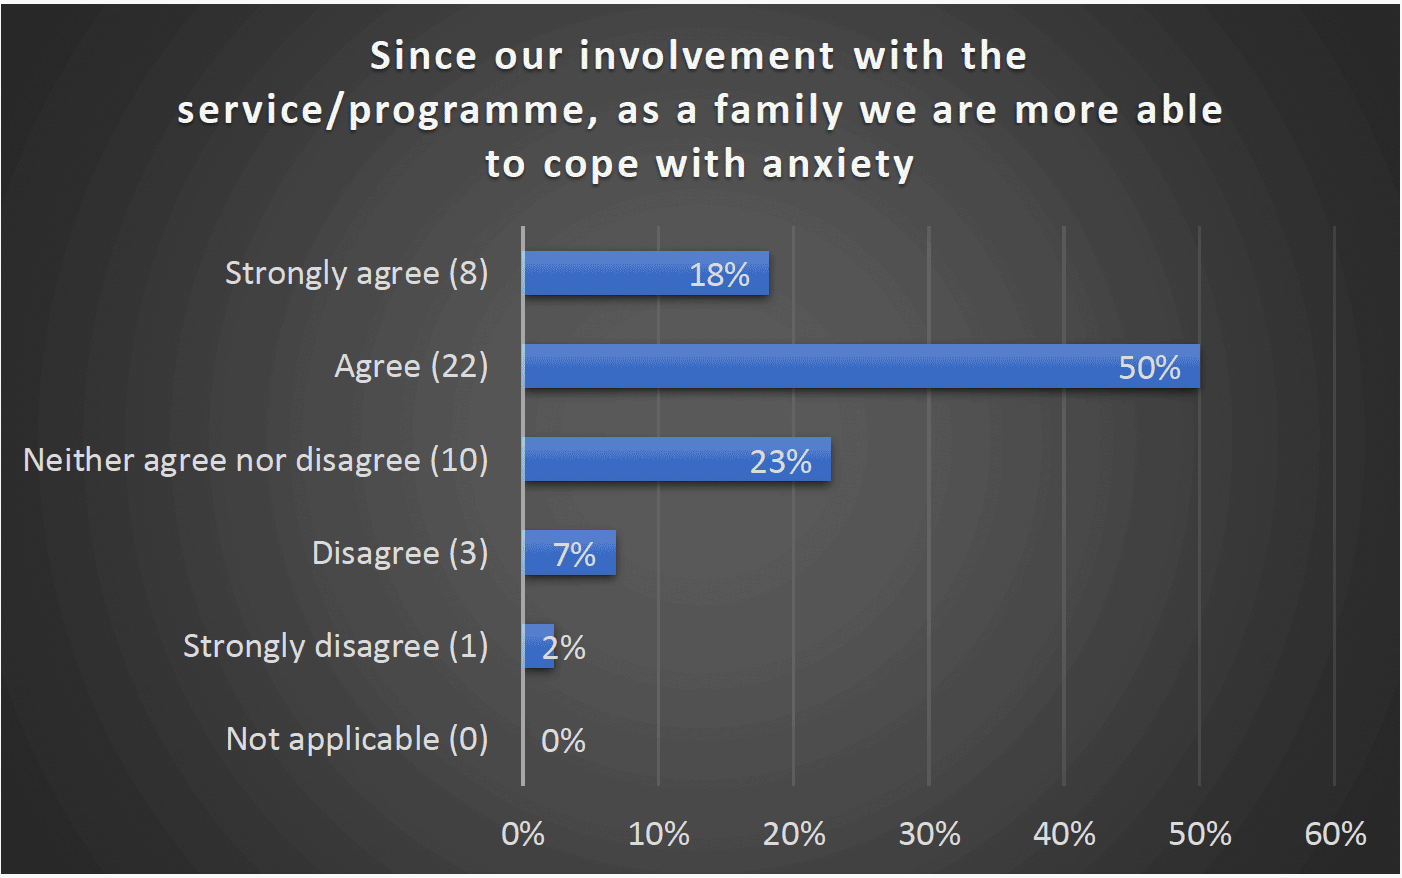 Since our involvement with the service/programme, as a family we are more able to cope with anxiety - Strongly agree (8) 18%, Agree (22) 50%, Neither agree nor disagree (10) 23%, Disagree (3) 7%, Strongly disagree (1) 2%